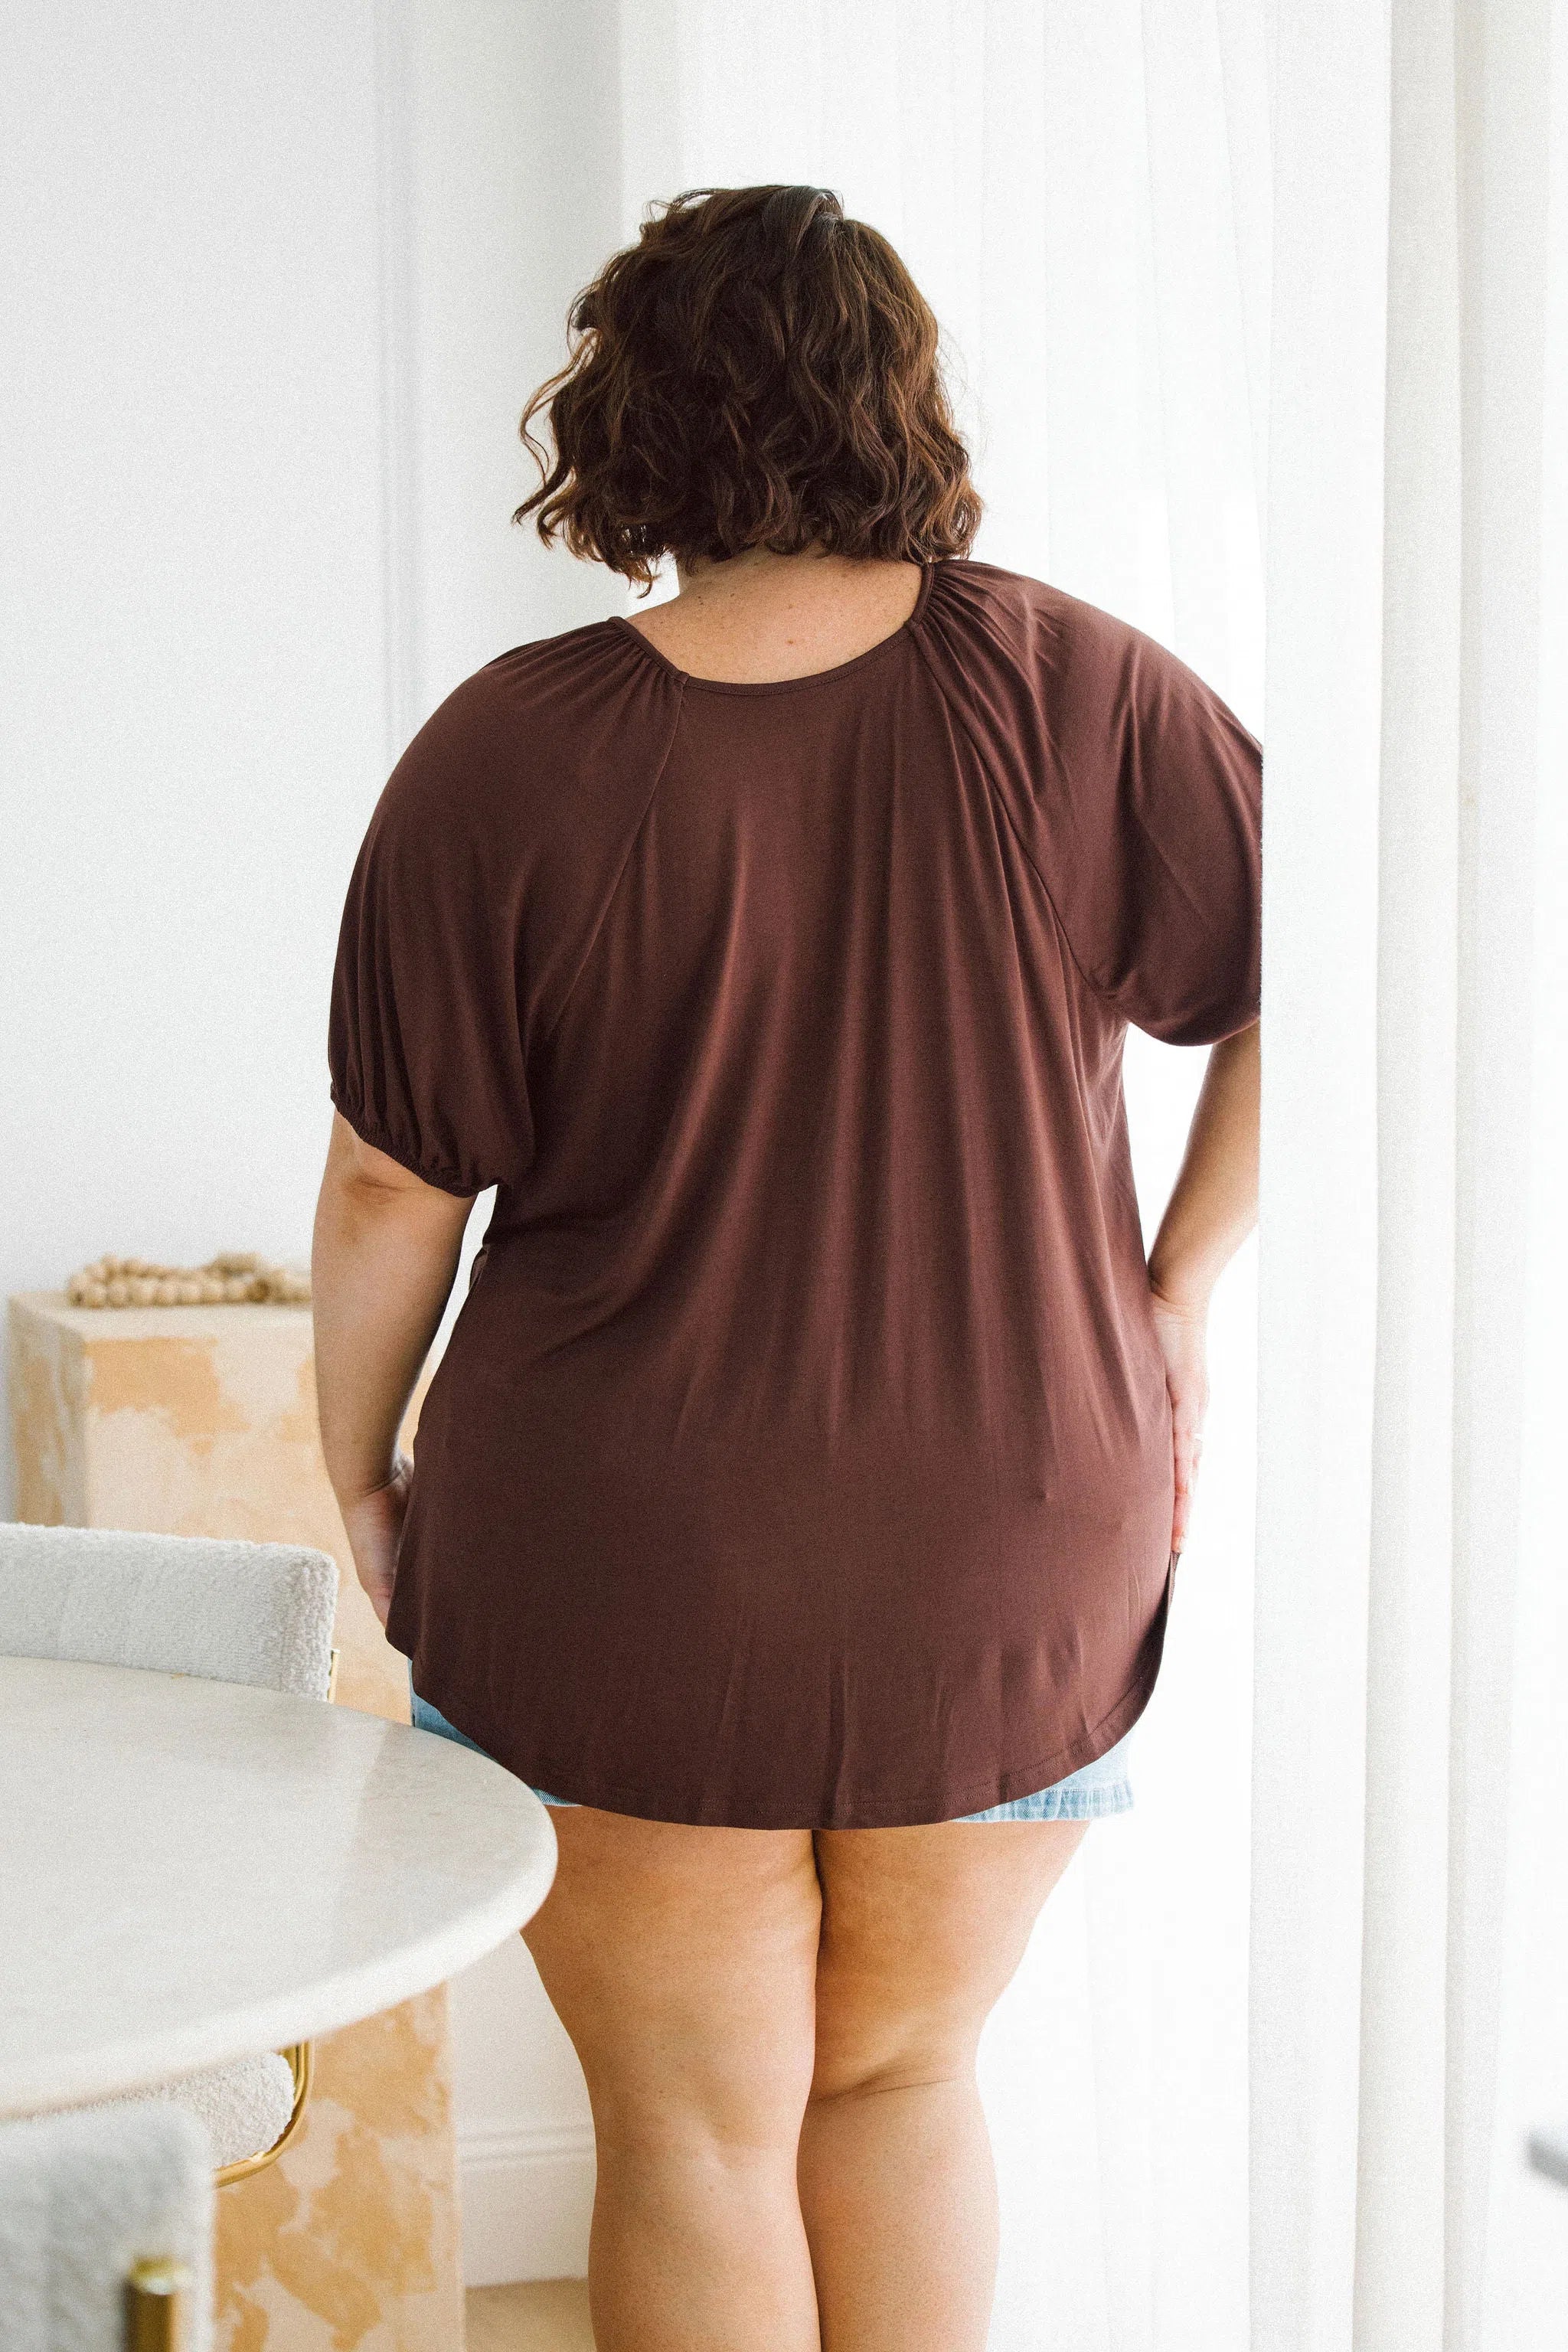 Australian Plus Size Tops, Remi Top in Chocolate Brown By Peach The Label